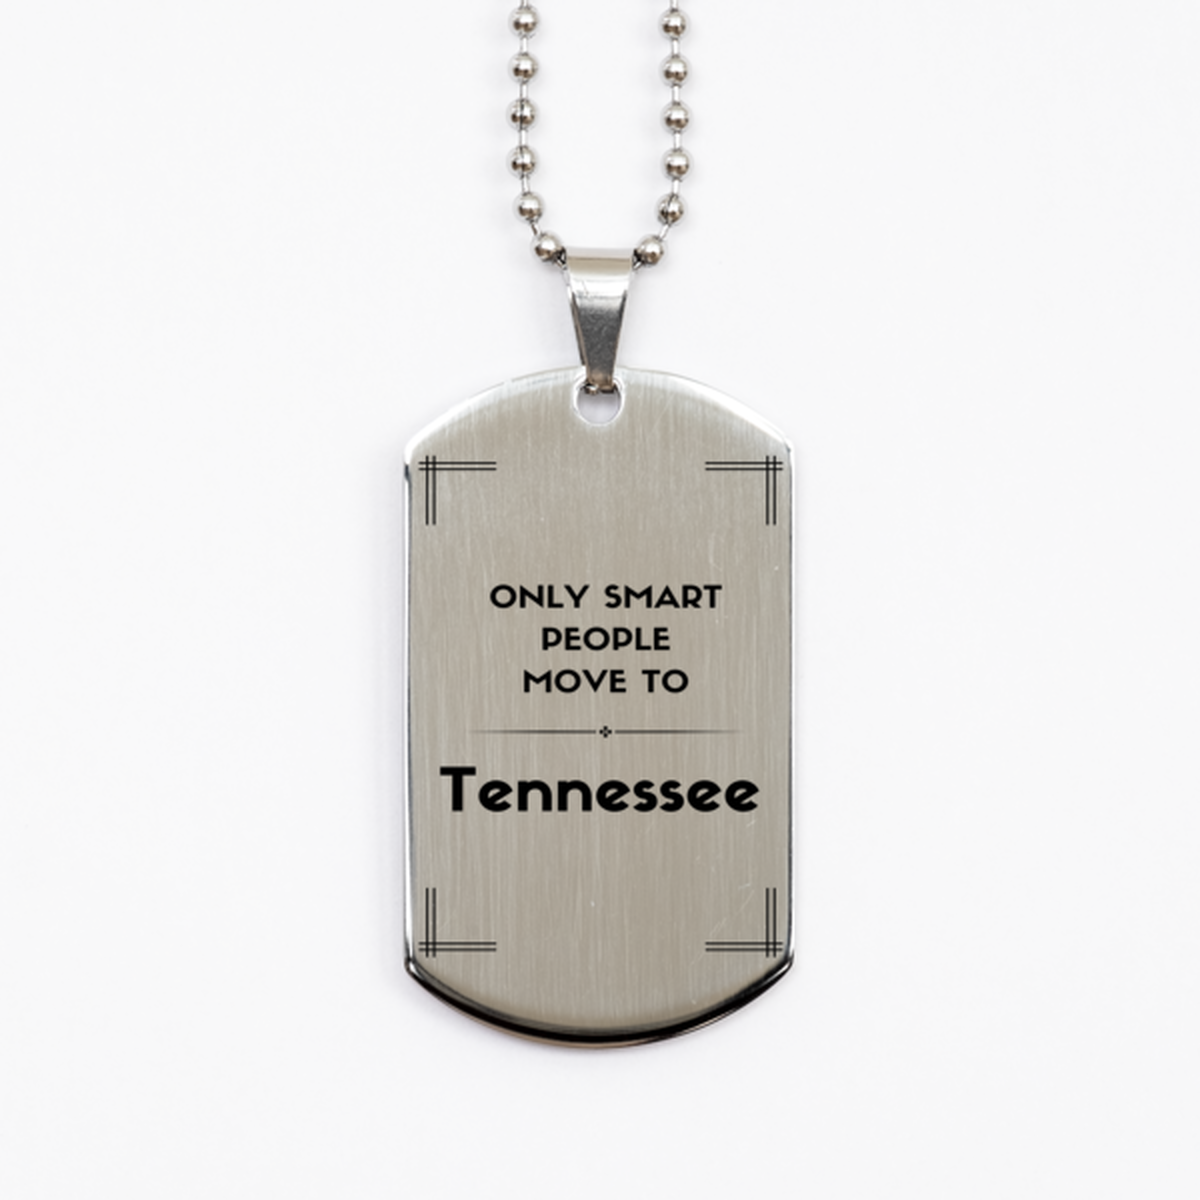 Only smart people move to Tennessee Silver Dog Tag, Gag Gifts For Tennessee, Move to Tennessee Gifts for Friends Coworker Funny Saying Quote